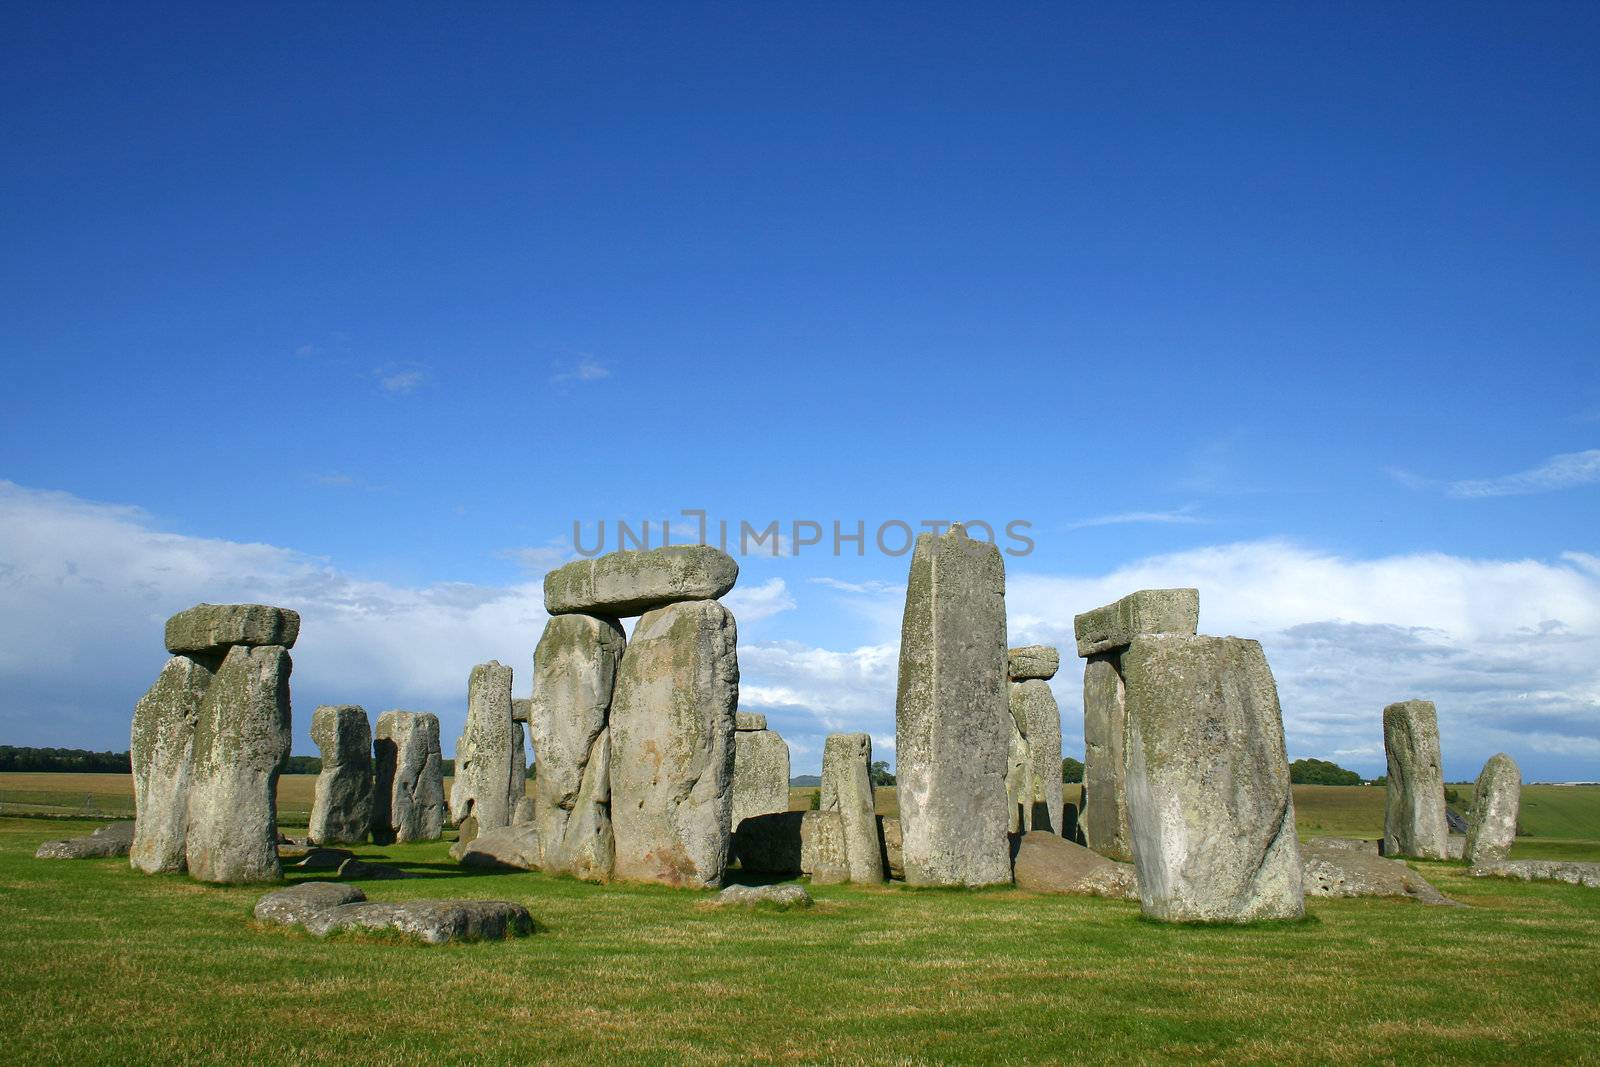 stonehenge with grass and sky